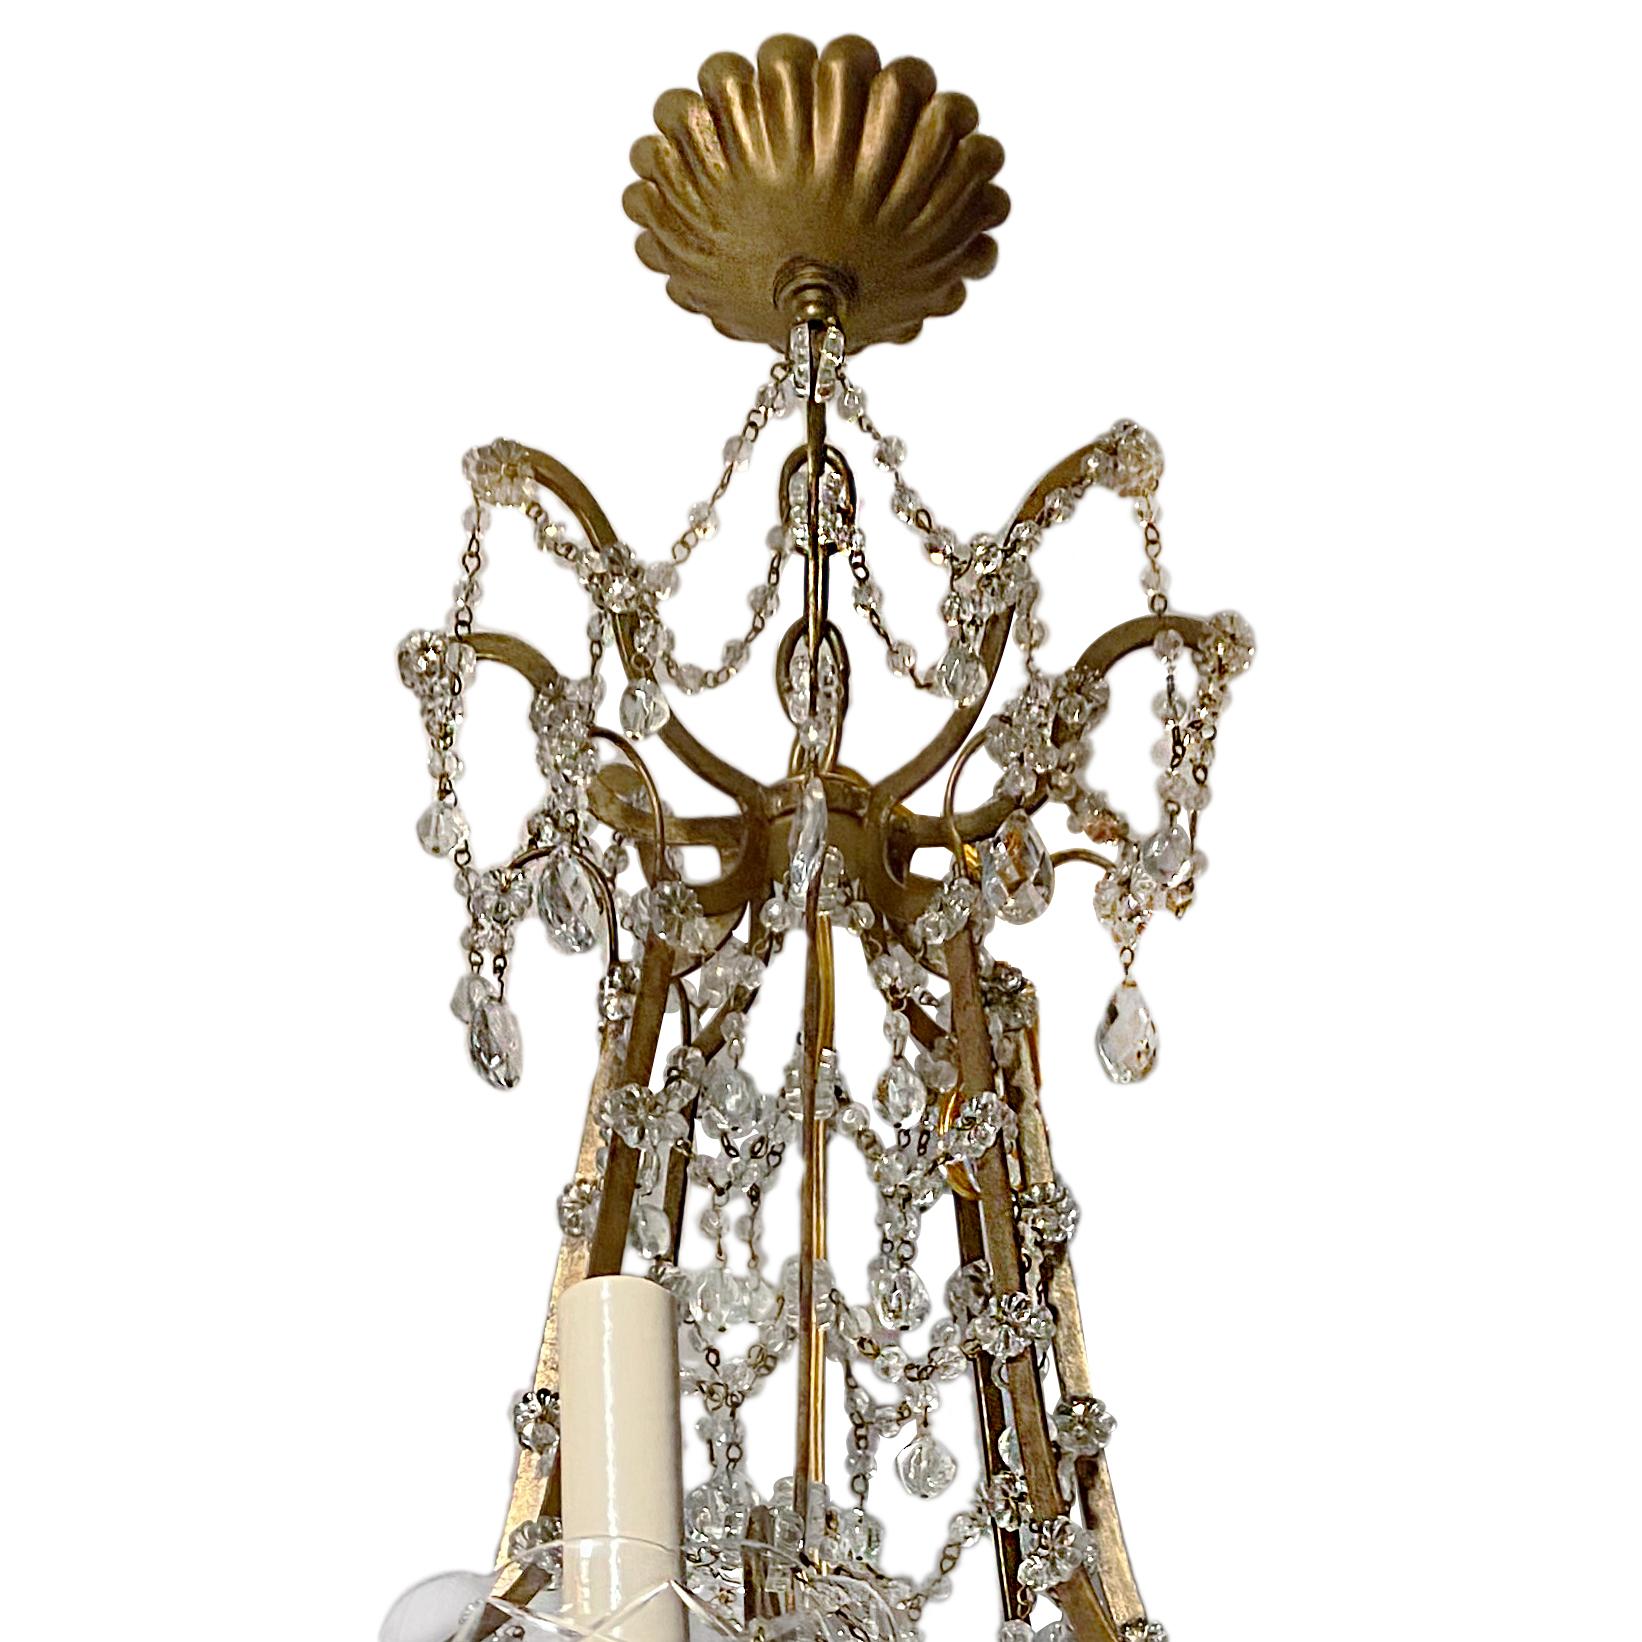 An Italian circa 1920s gilt metal 8 light chandelier with pearl shaped glass beads and tear drop pendants.

Measurements:
Drop 38